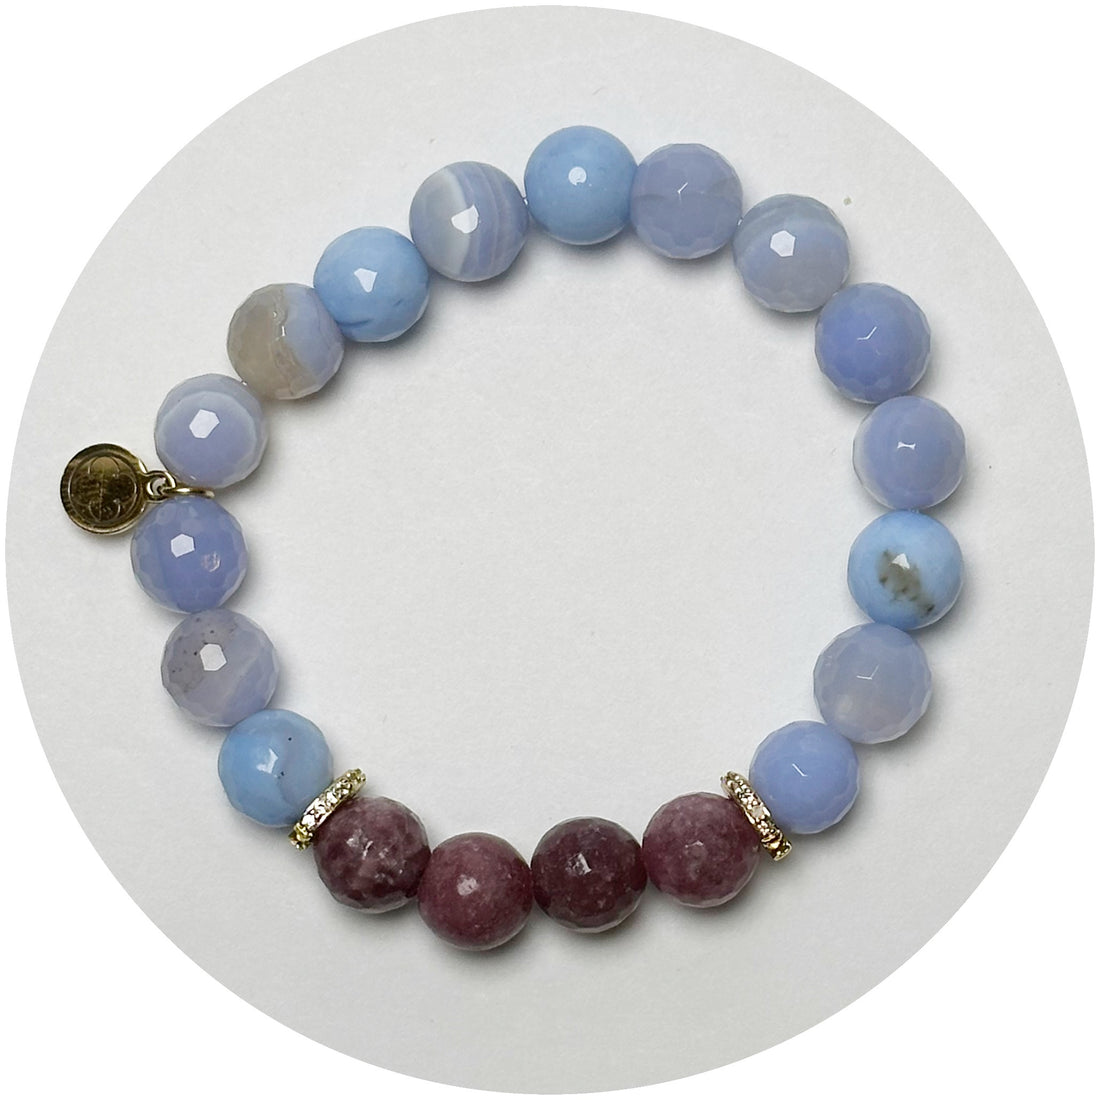 Serenity Blue Agate with Lepidolite Accent